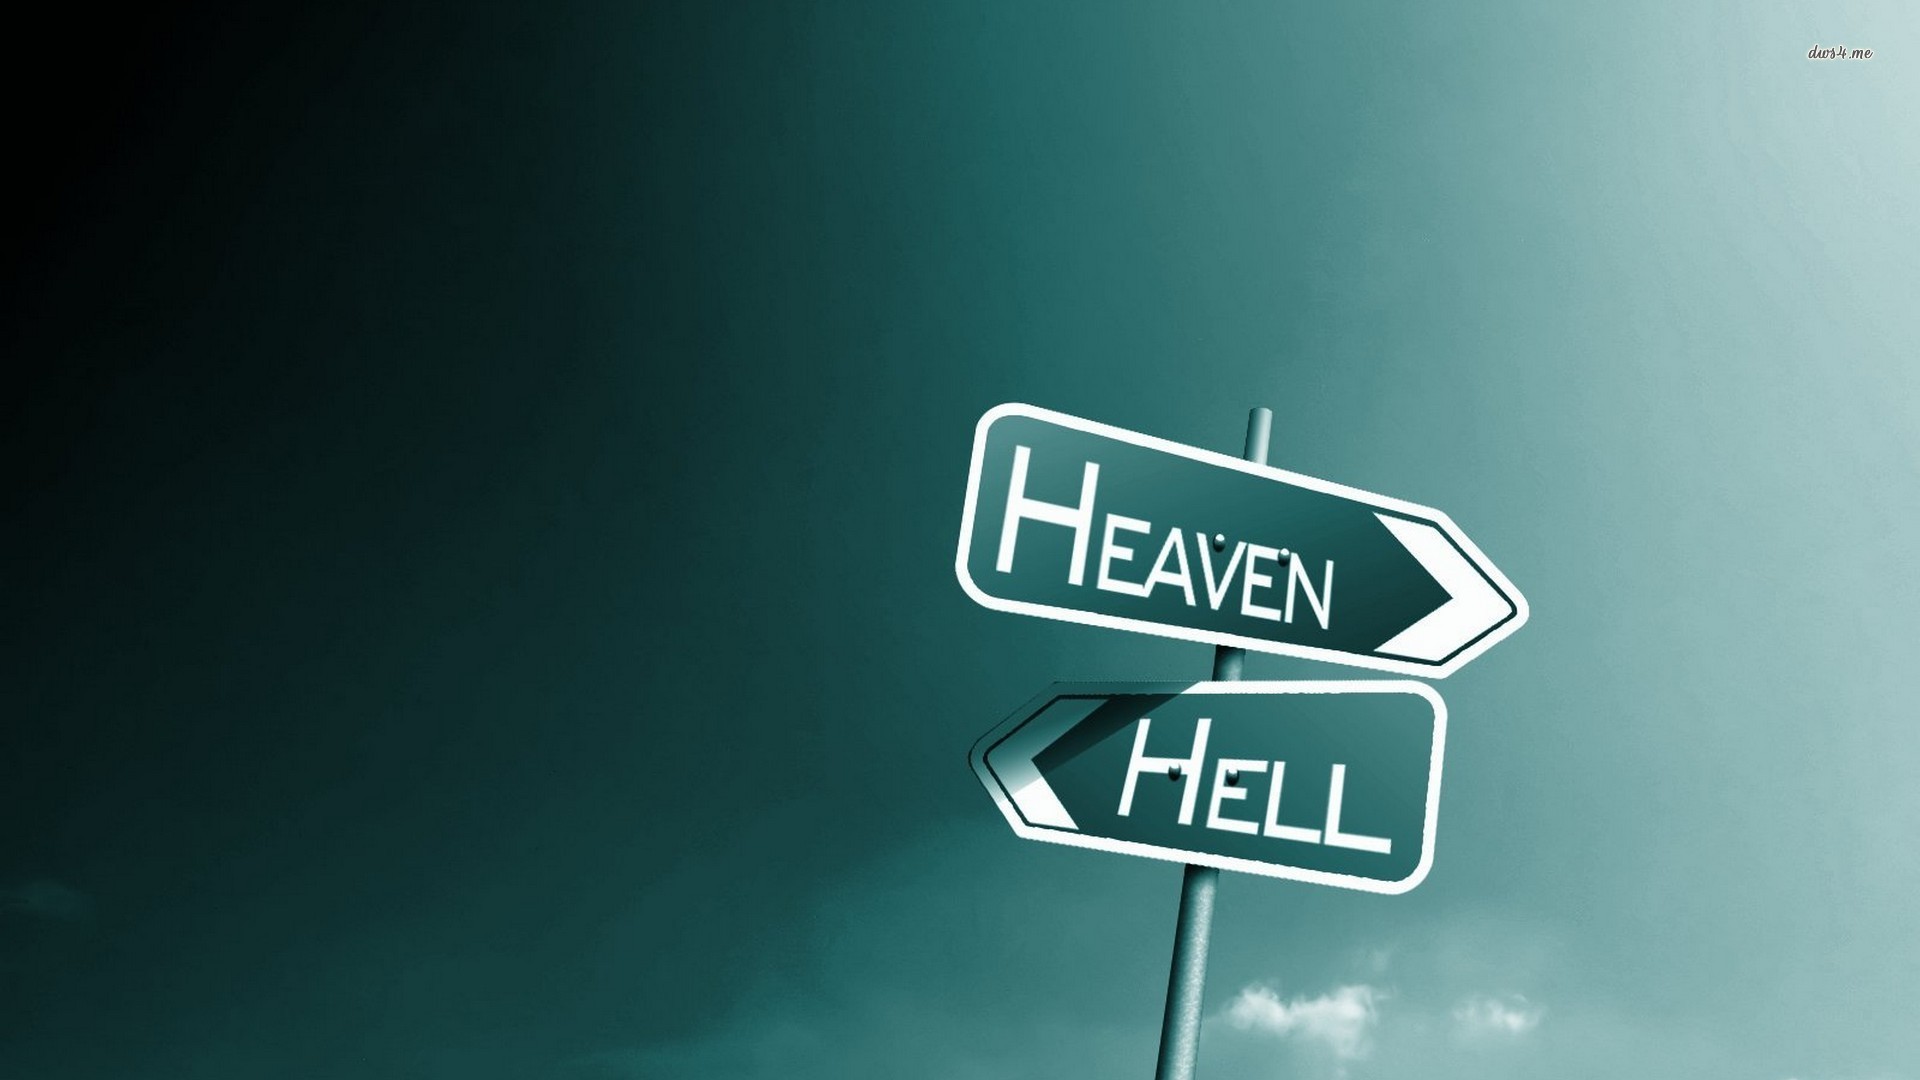 1920x1080 Heaven Or Hell wallpapers HD free - 265133